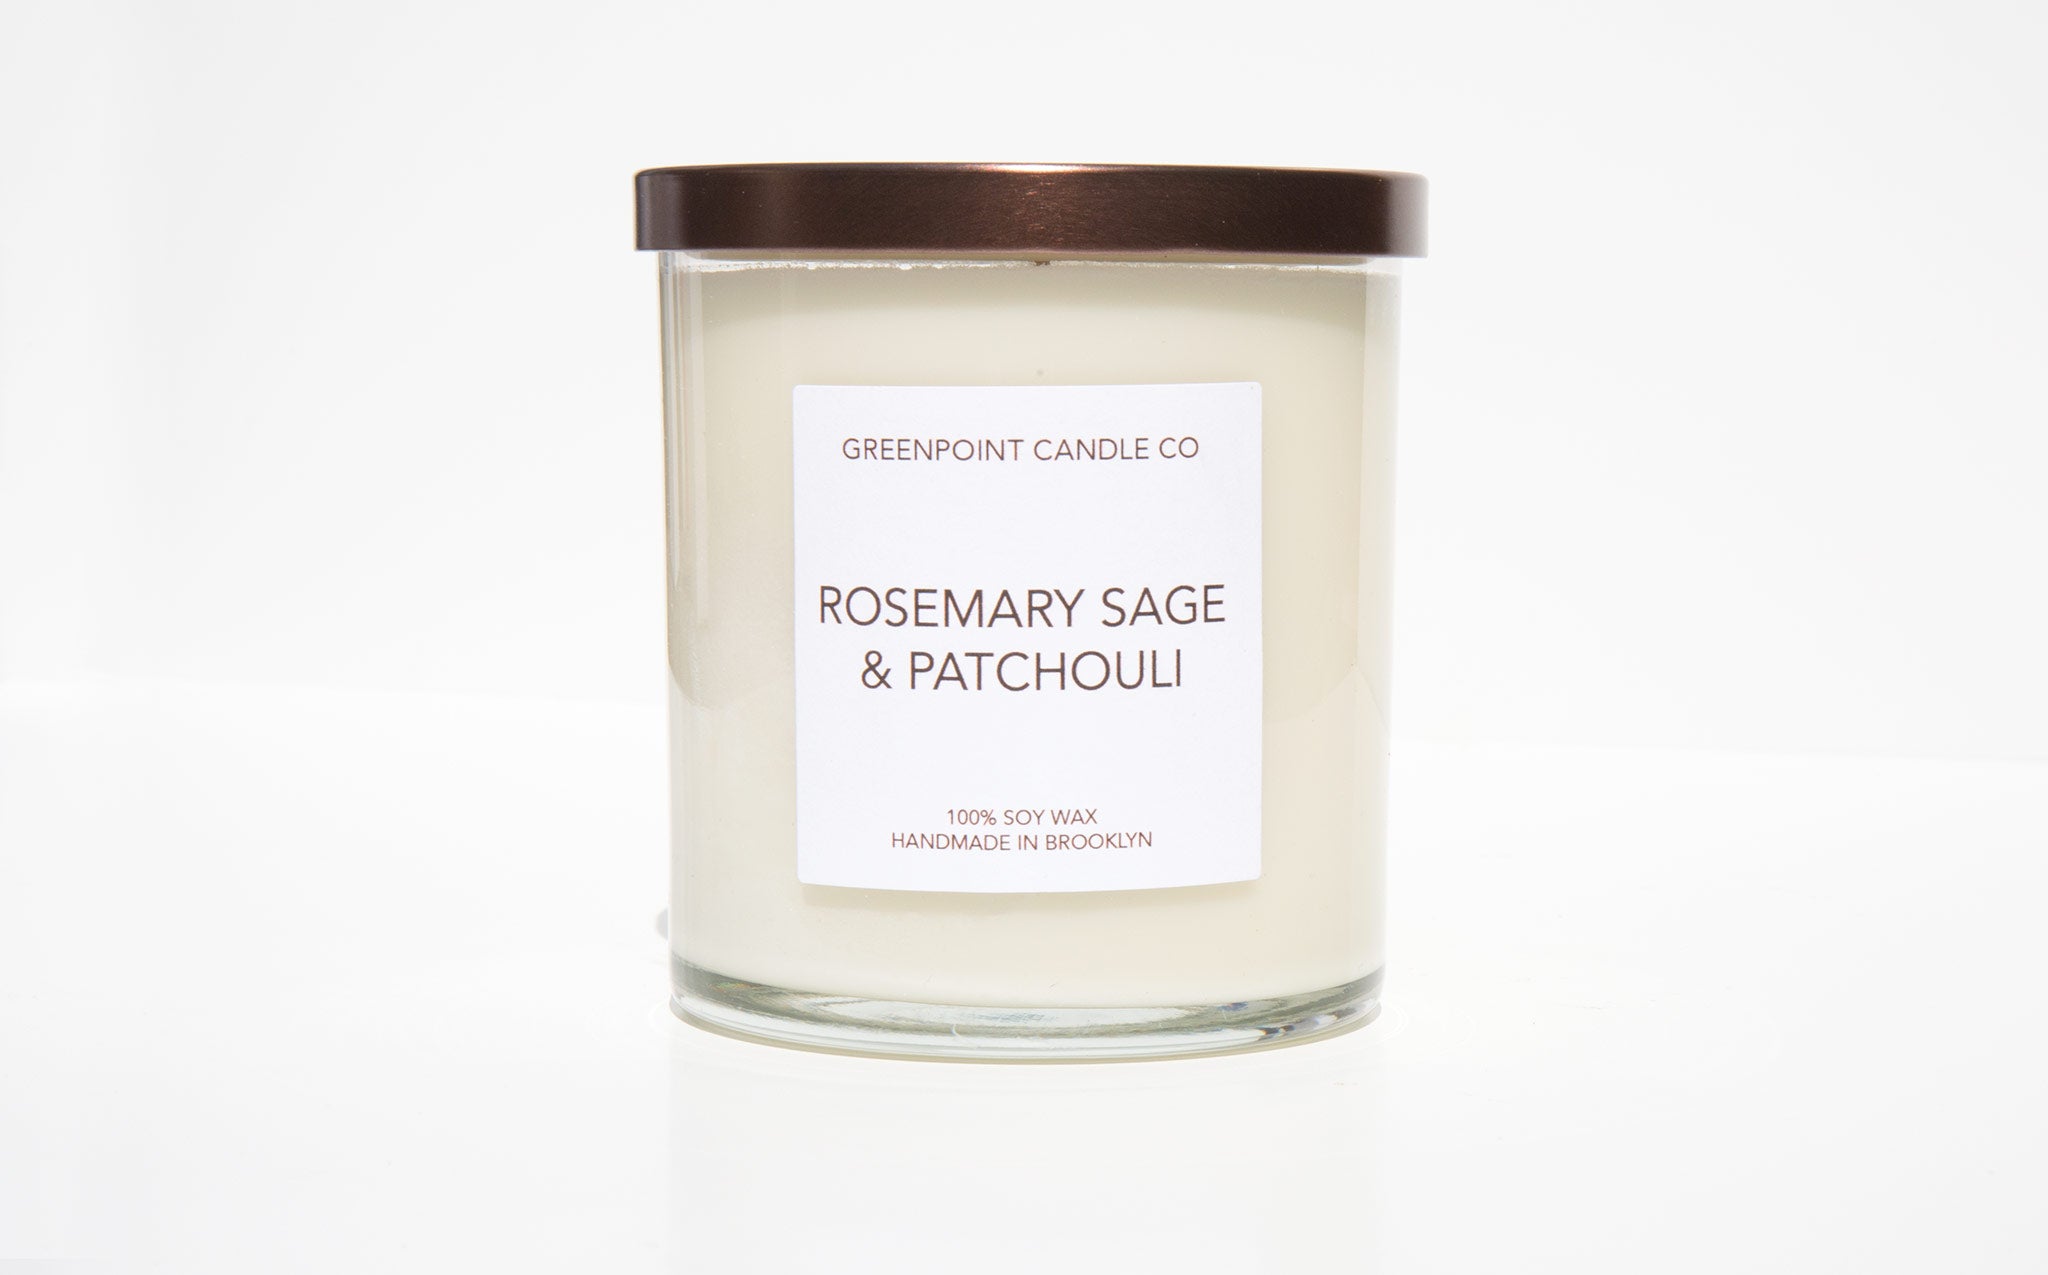 Greenpoint Candle Company Rosemary, Sage, and Patchouli